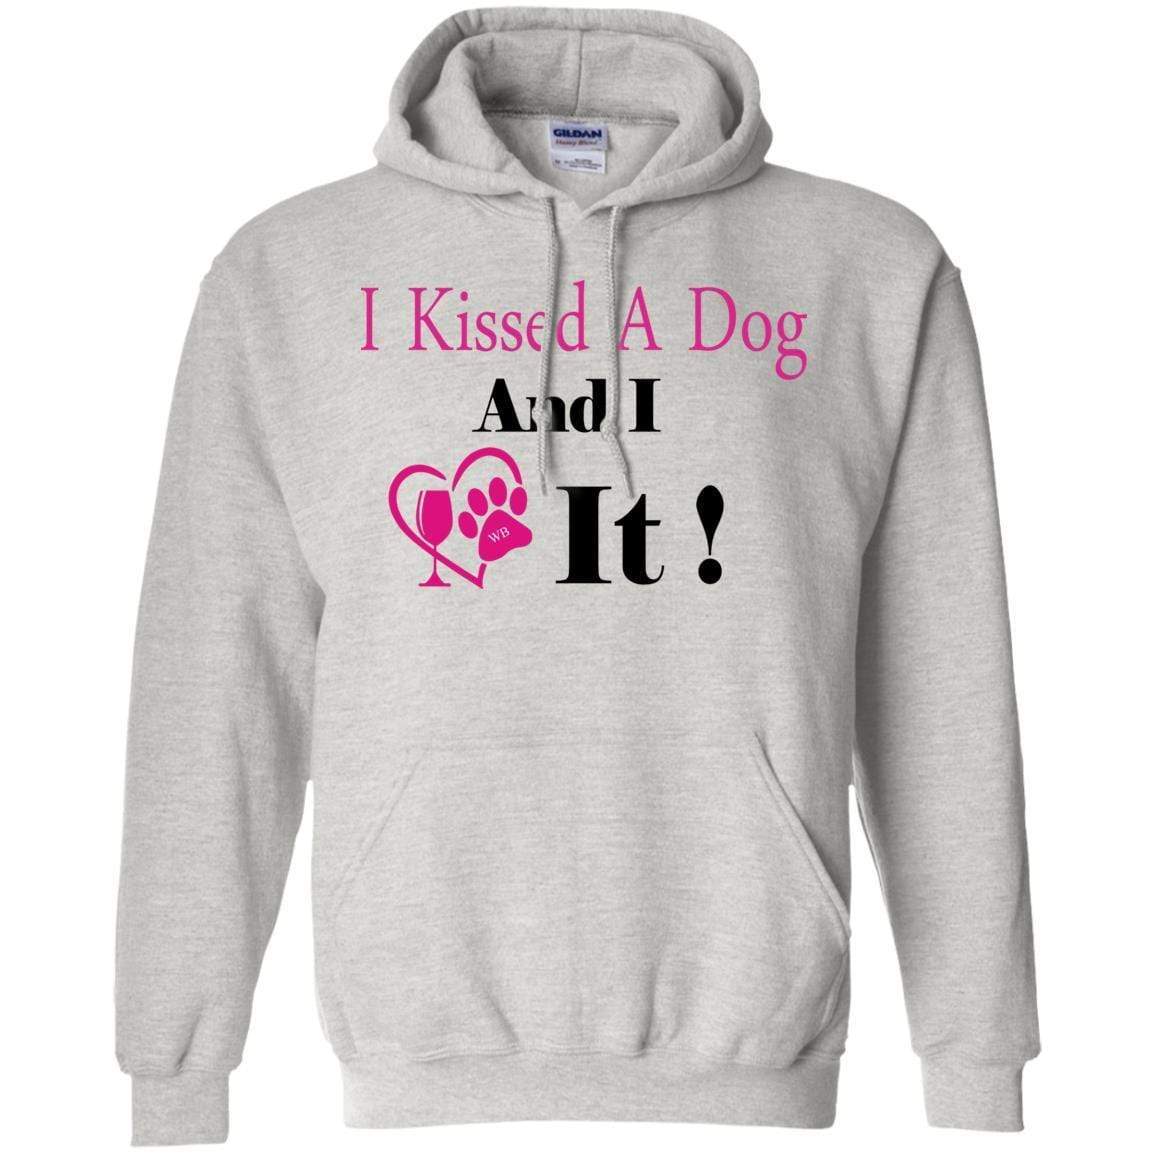 Sweatshirts Ash / S WineyBitches.co "I Kissed A Dog And I Loved It:"  Pullover Unisex Hoodie 8 oz. WineyBitchesCo